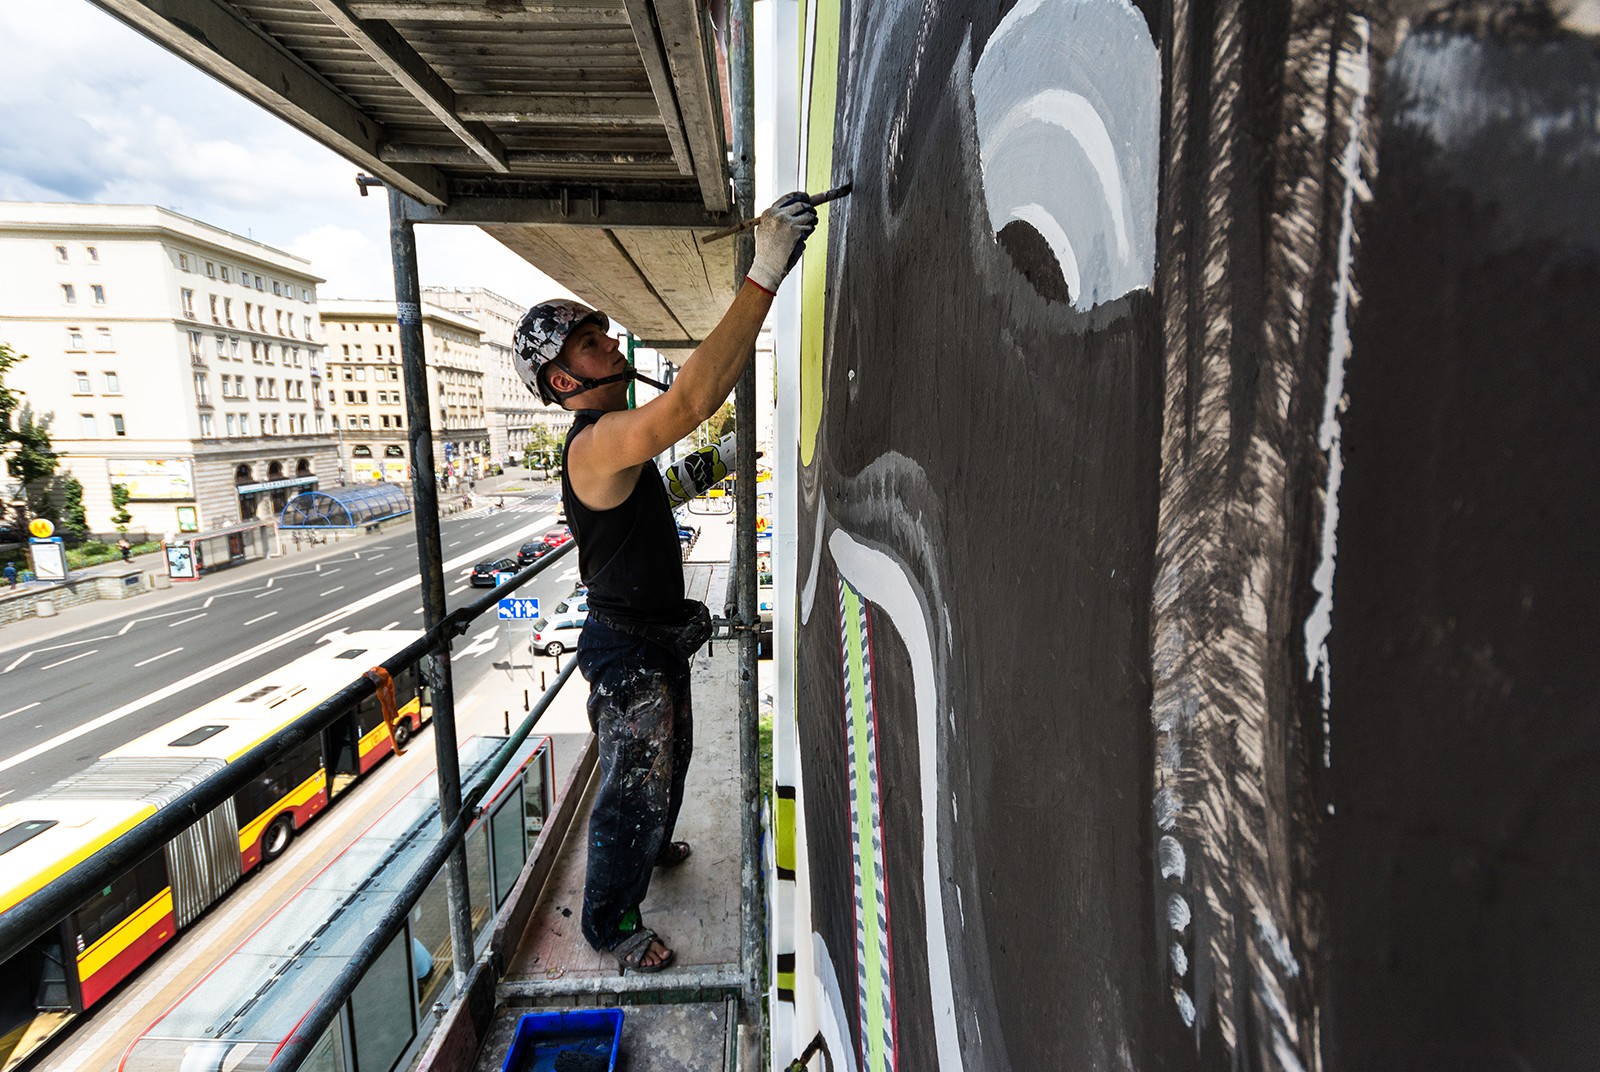 Painters paint the hand-painted outdoor advertising for the Adidas Ozweego | Adidas Ozweego | Portfolio